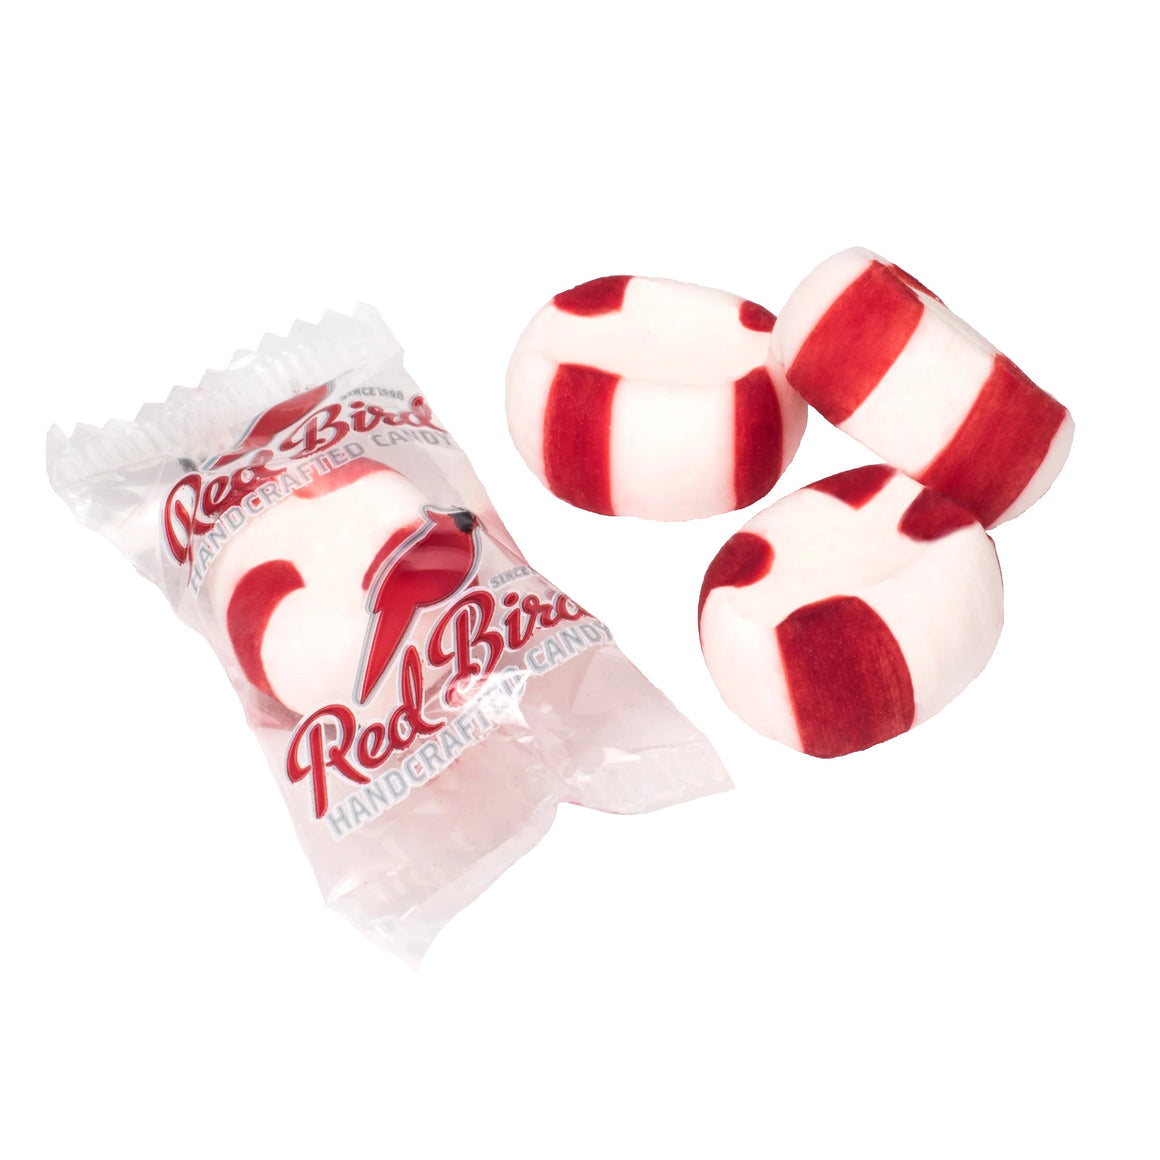 All City Candy Red Bird Peppermint Puff - 3 LB Bulk Bag Bulk Wrapped Piedmont Candy Company For fresh candy and great service, visit www.allcitycandy.com